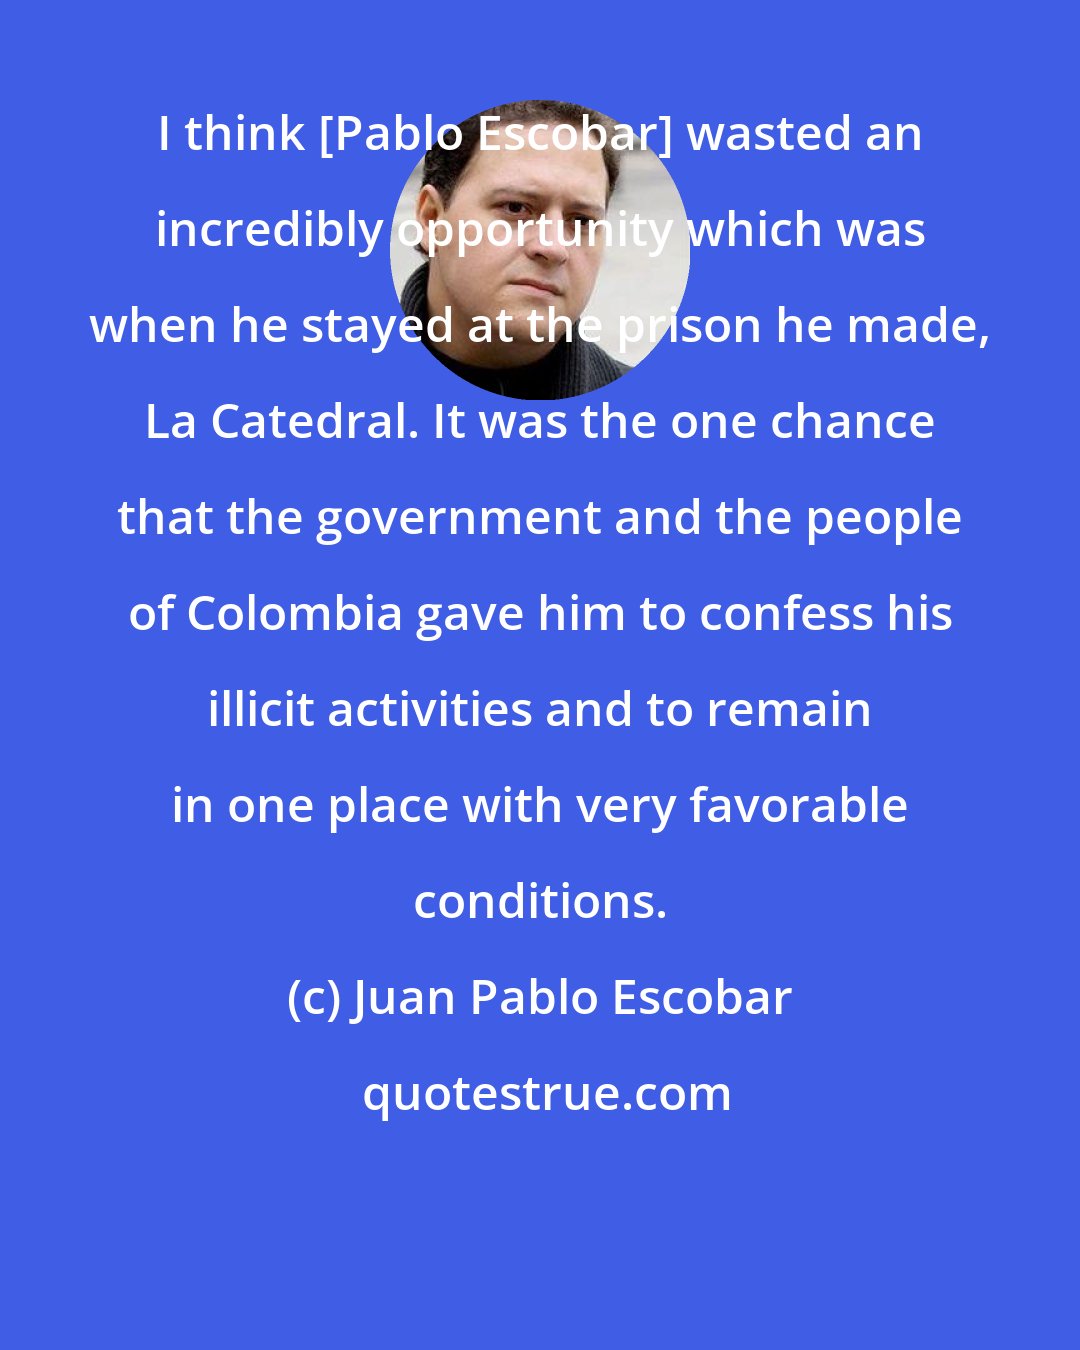 Juan Pablo Escobar: I think [Pablo Escobar] wasted an incredibly opportunity which was when he stayed at the prison he made, La Catedral. It was the one chance that the government and the people of Colombia gave him to confess his illicit activities and to remain in one place with very favorable conditions.